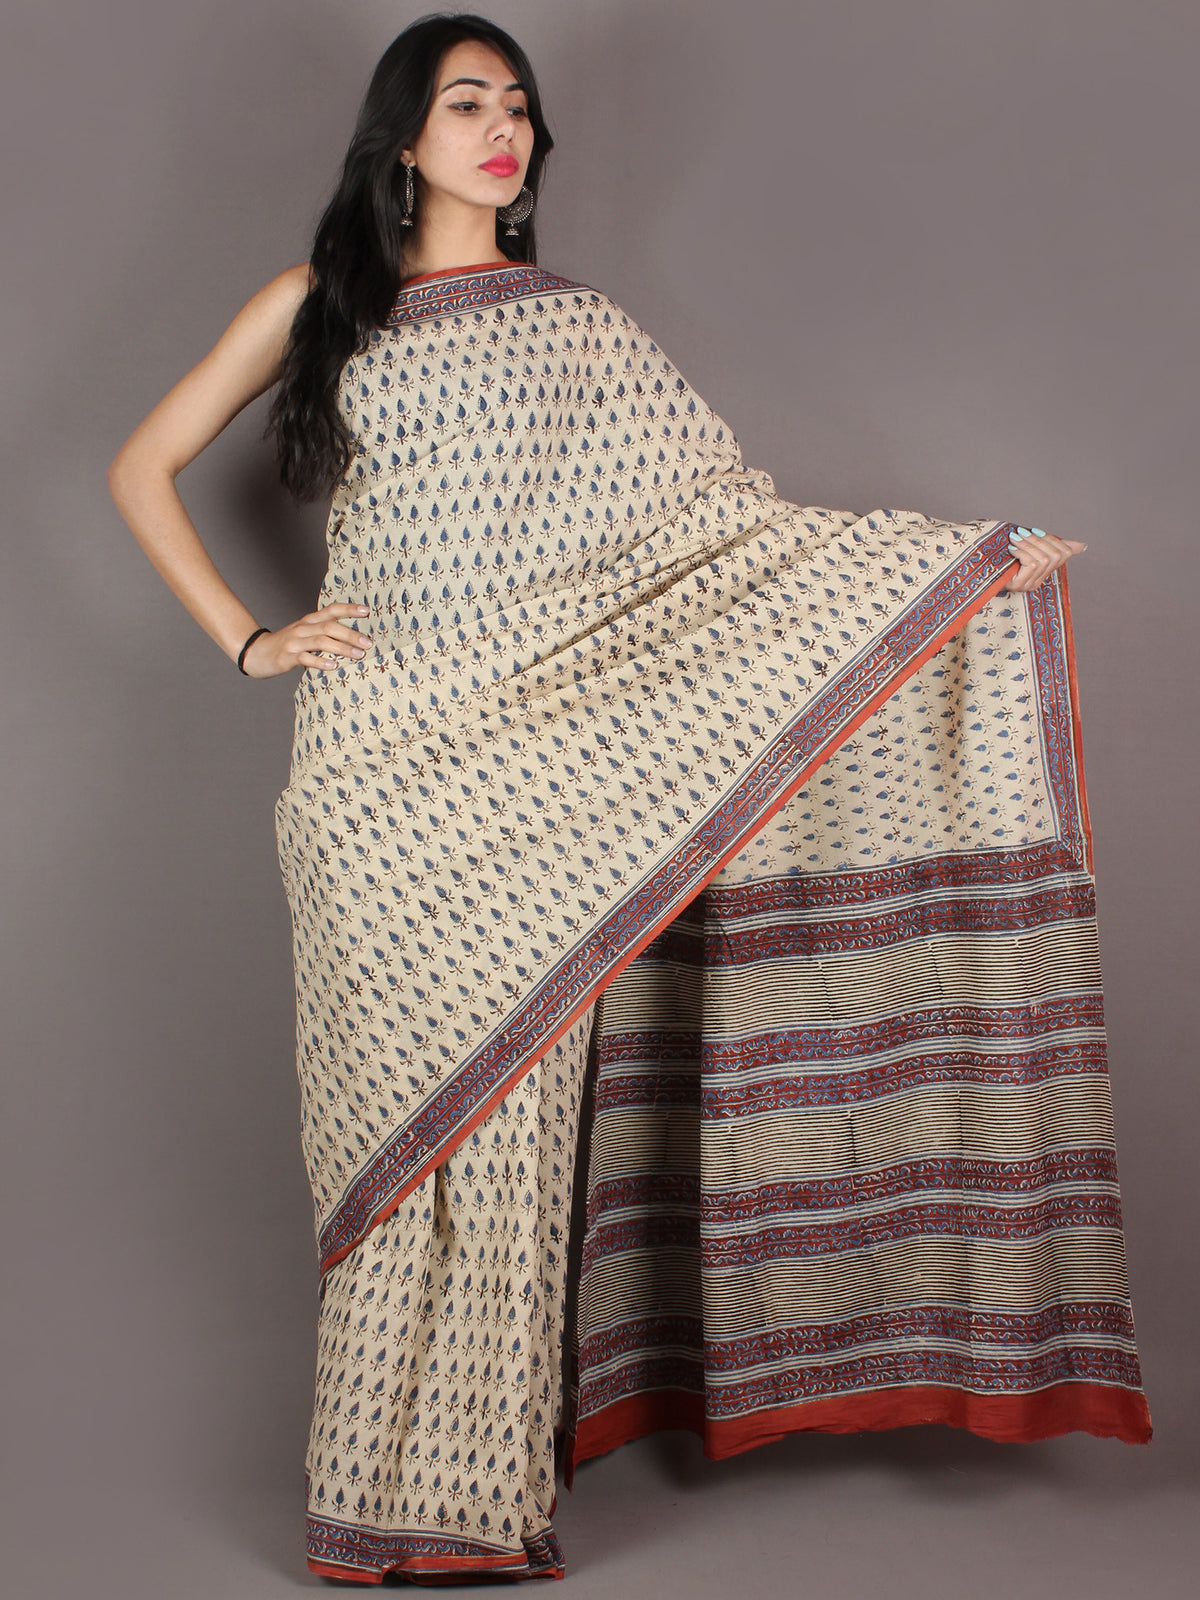 Ivory Orange Blue Hand Block Printed in Natural Colors Cotton Mul Saree - S03170938